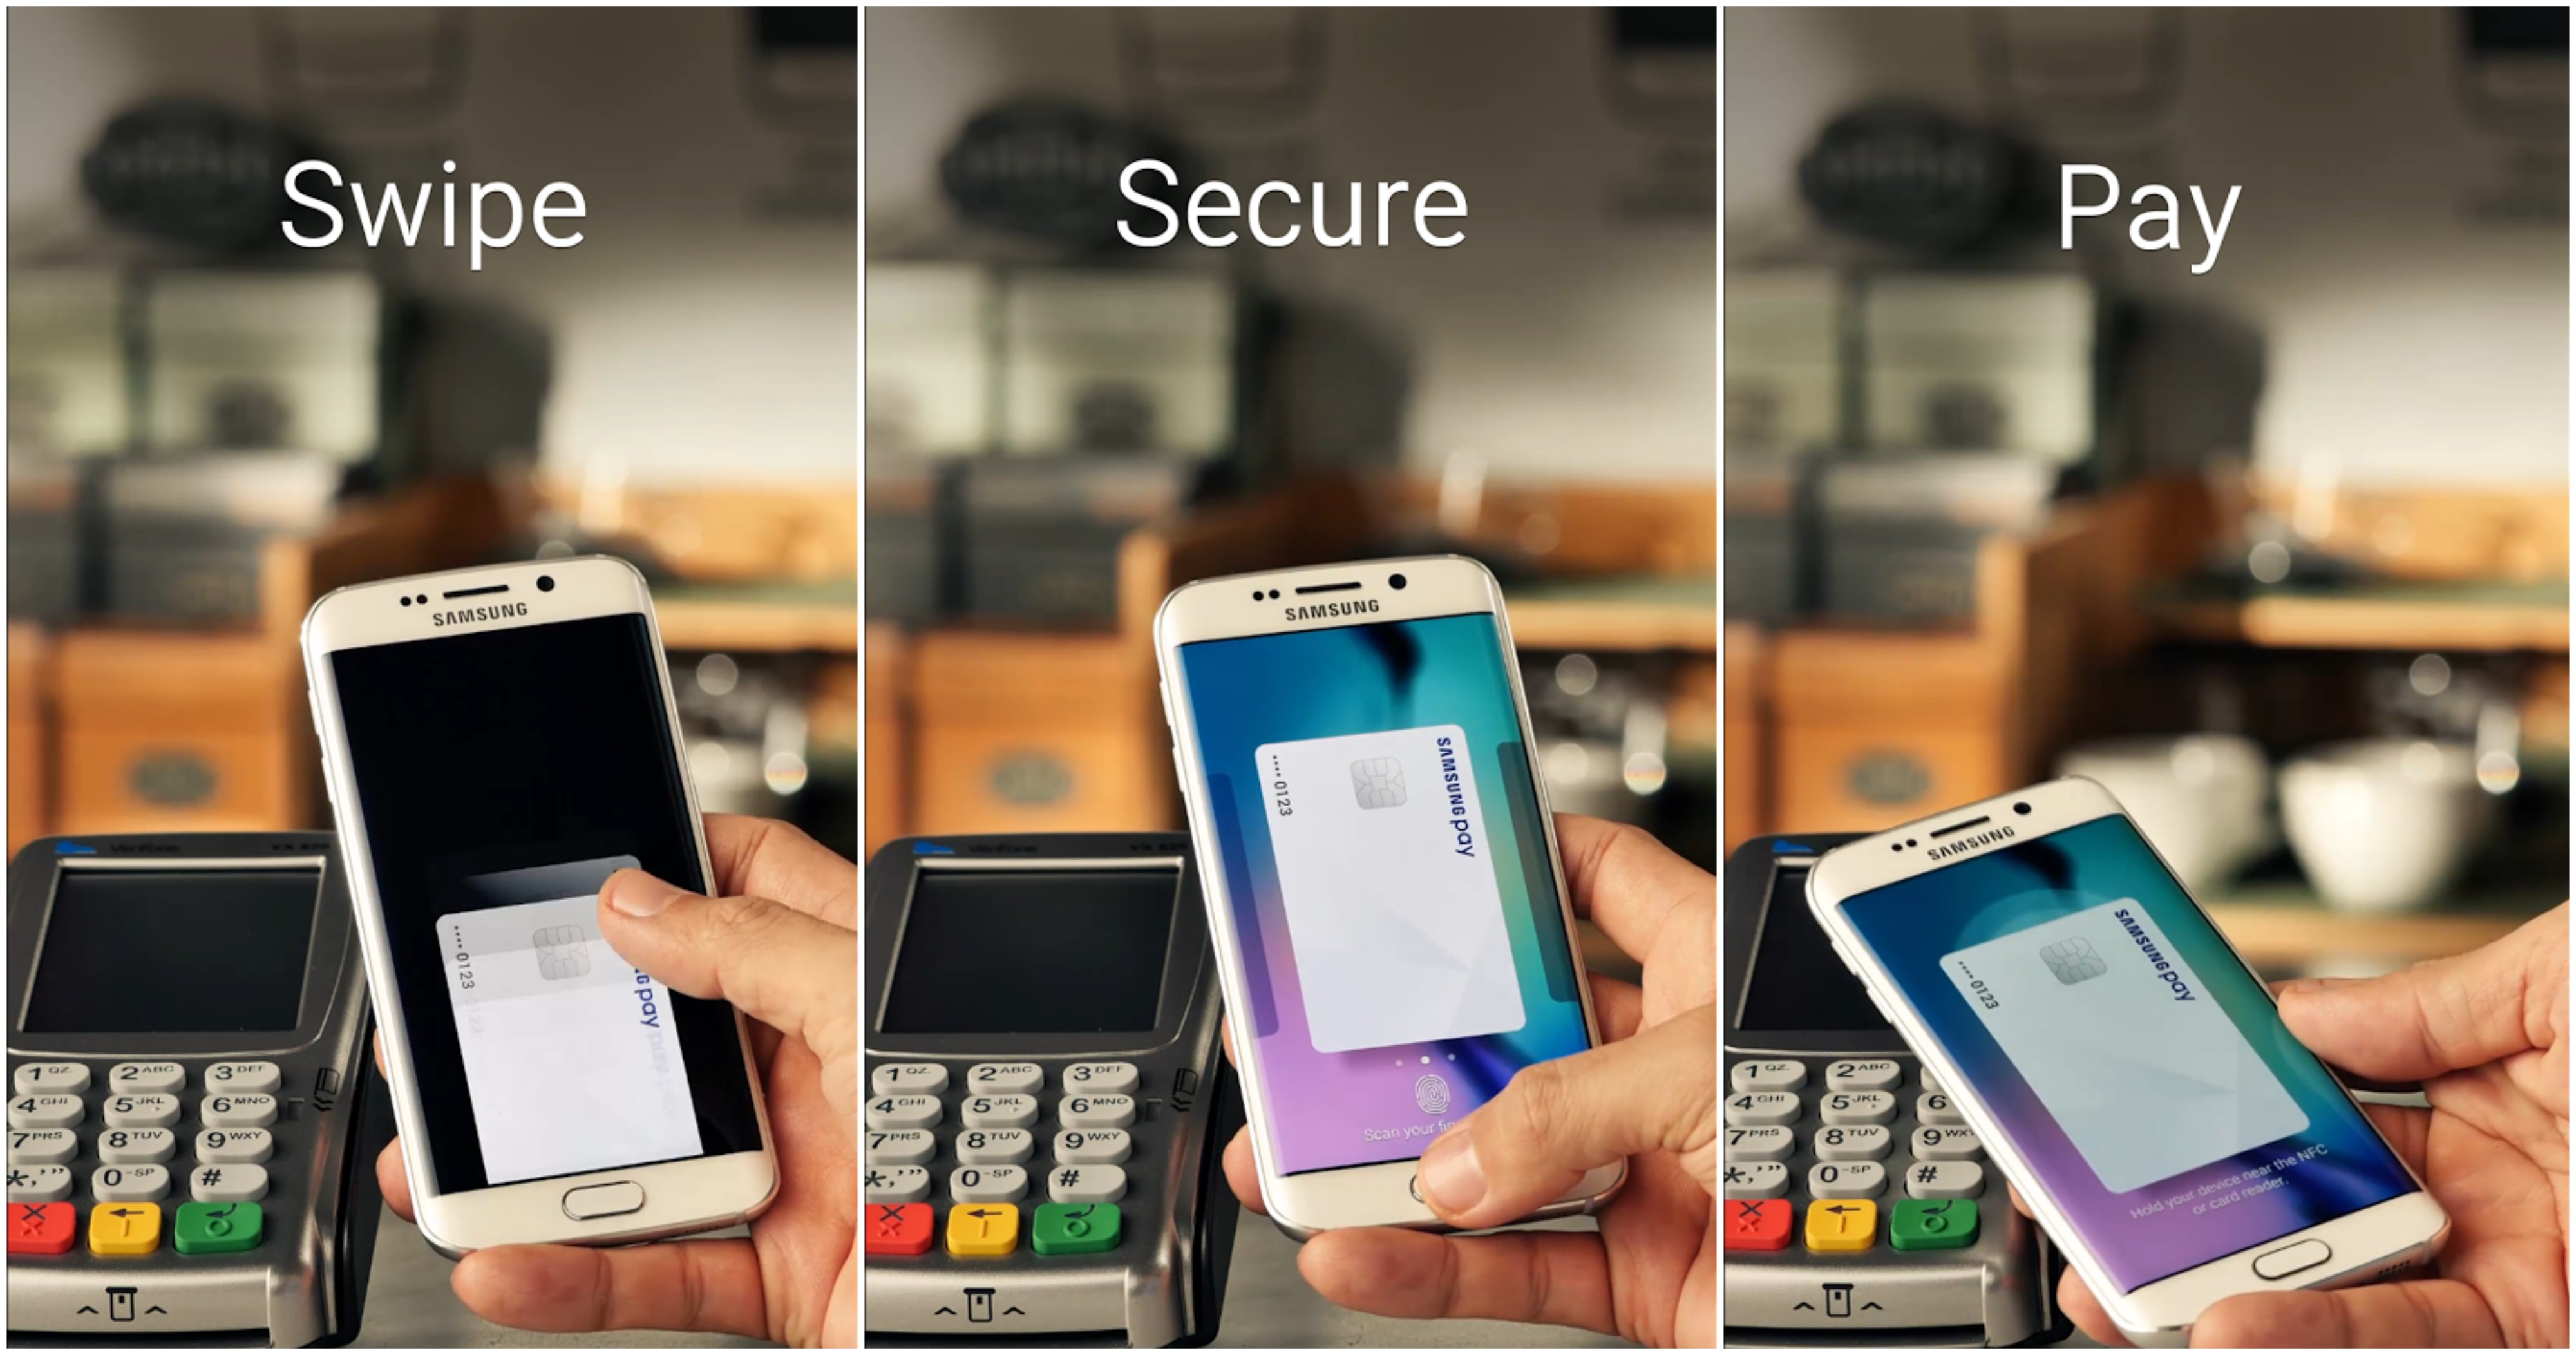 Samsung-Pay-to-be-released-in-the-UK-by-the-end-of-this-year.